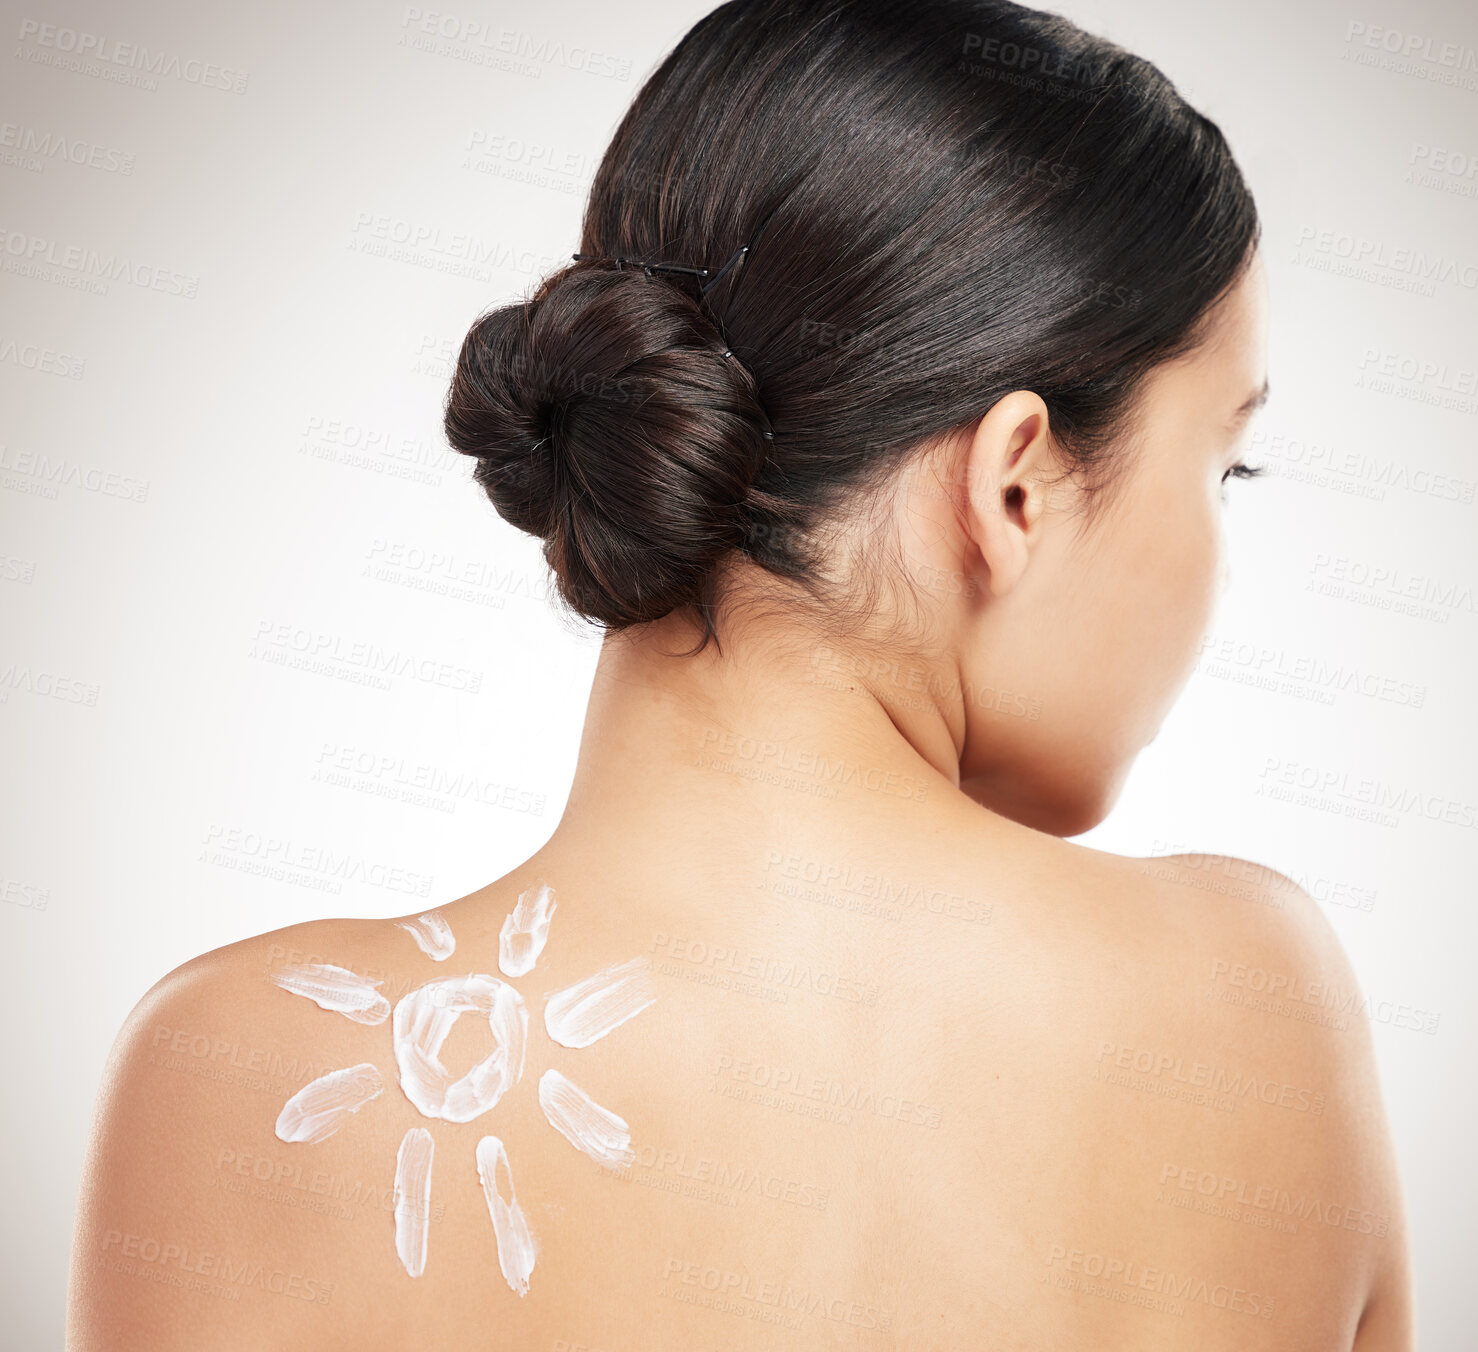 Buy stock photo Back of a beautiful woman showing her applying cream on her shoulder posing against a grey studio background. Skincare is important. Protection from the sun